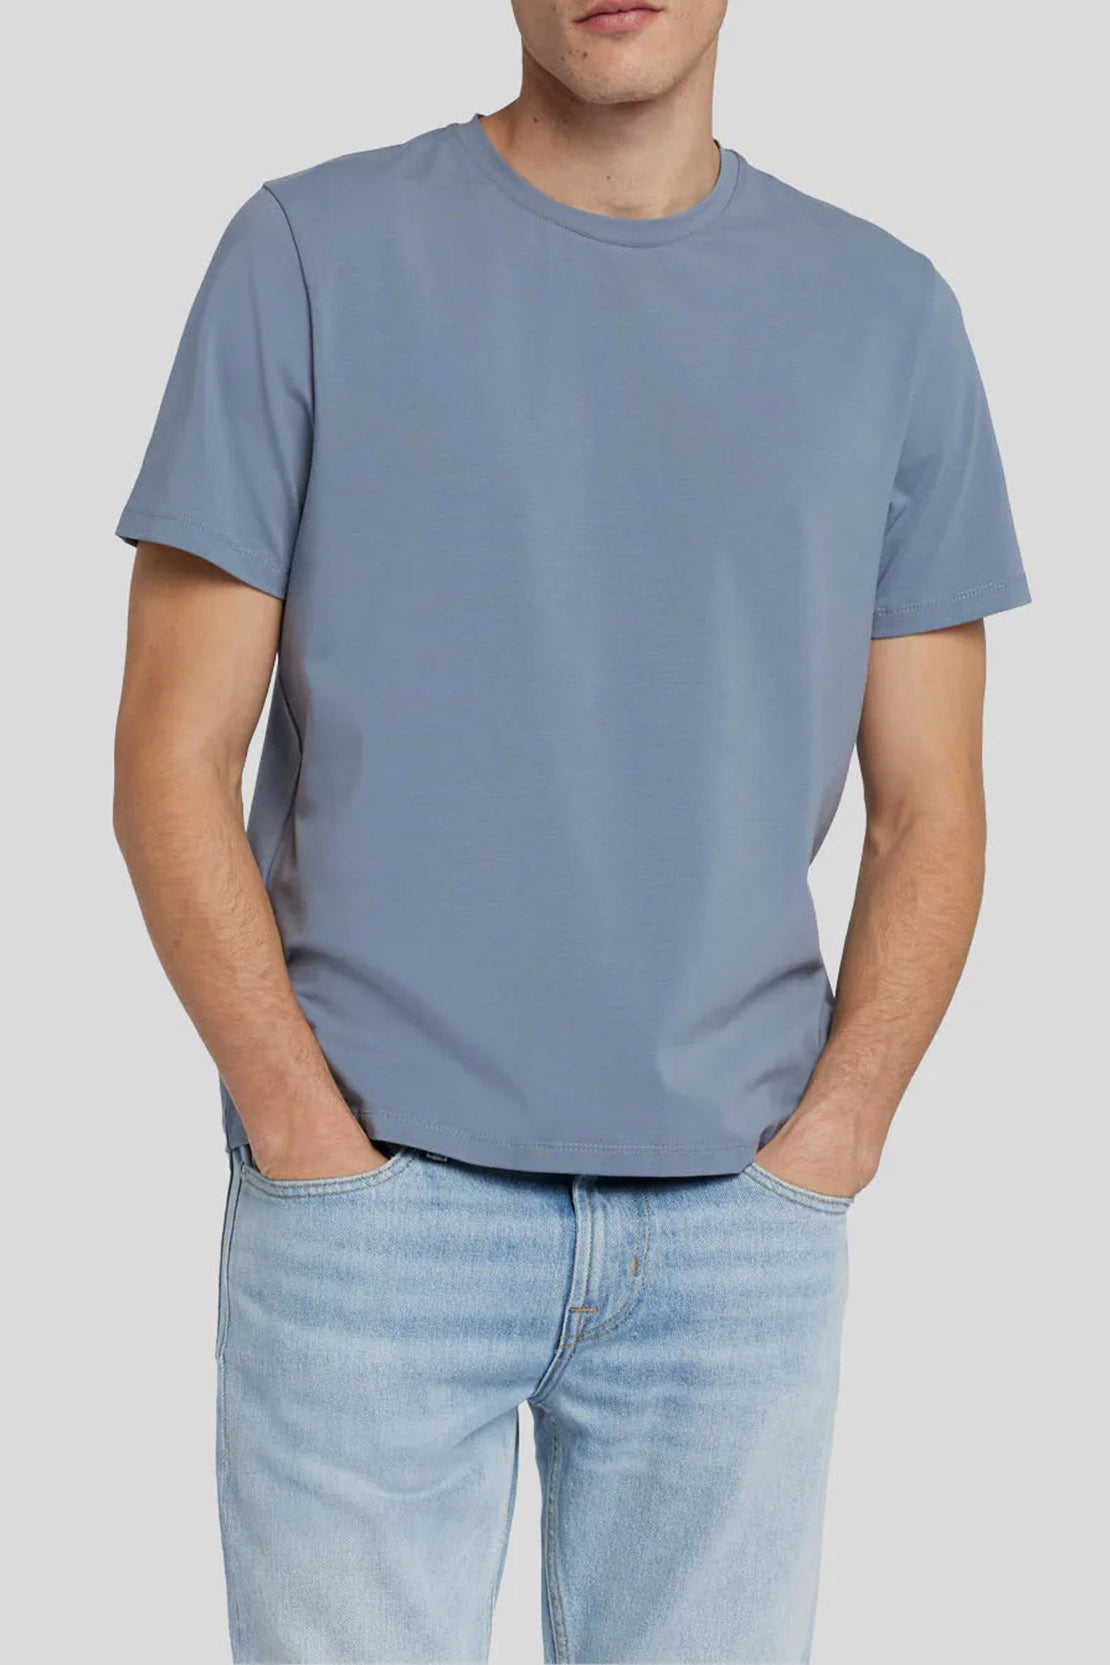 7 FOR ALL MANKIND - Dusty Blue Luxe Performance T-shirt JSIM2370DB